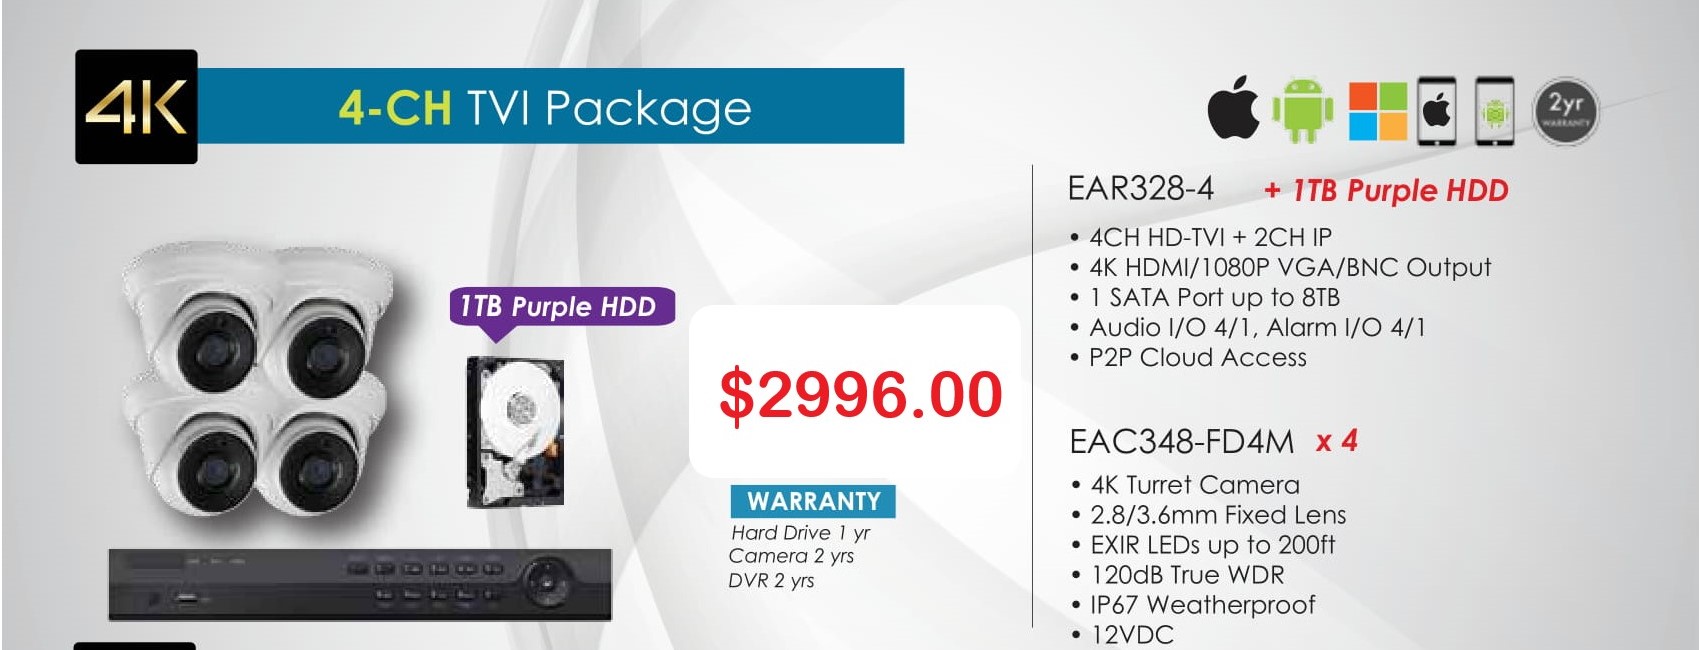 4k-4ch-pack-2 New Promo Packages